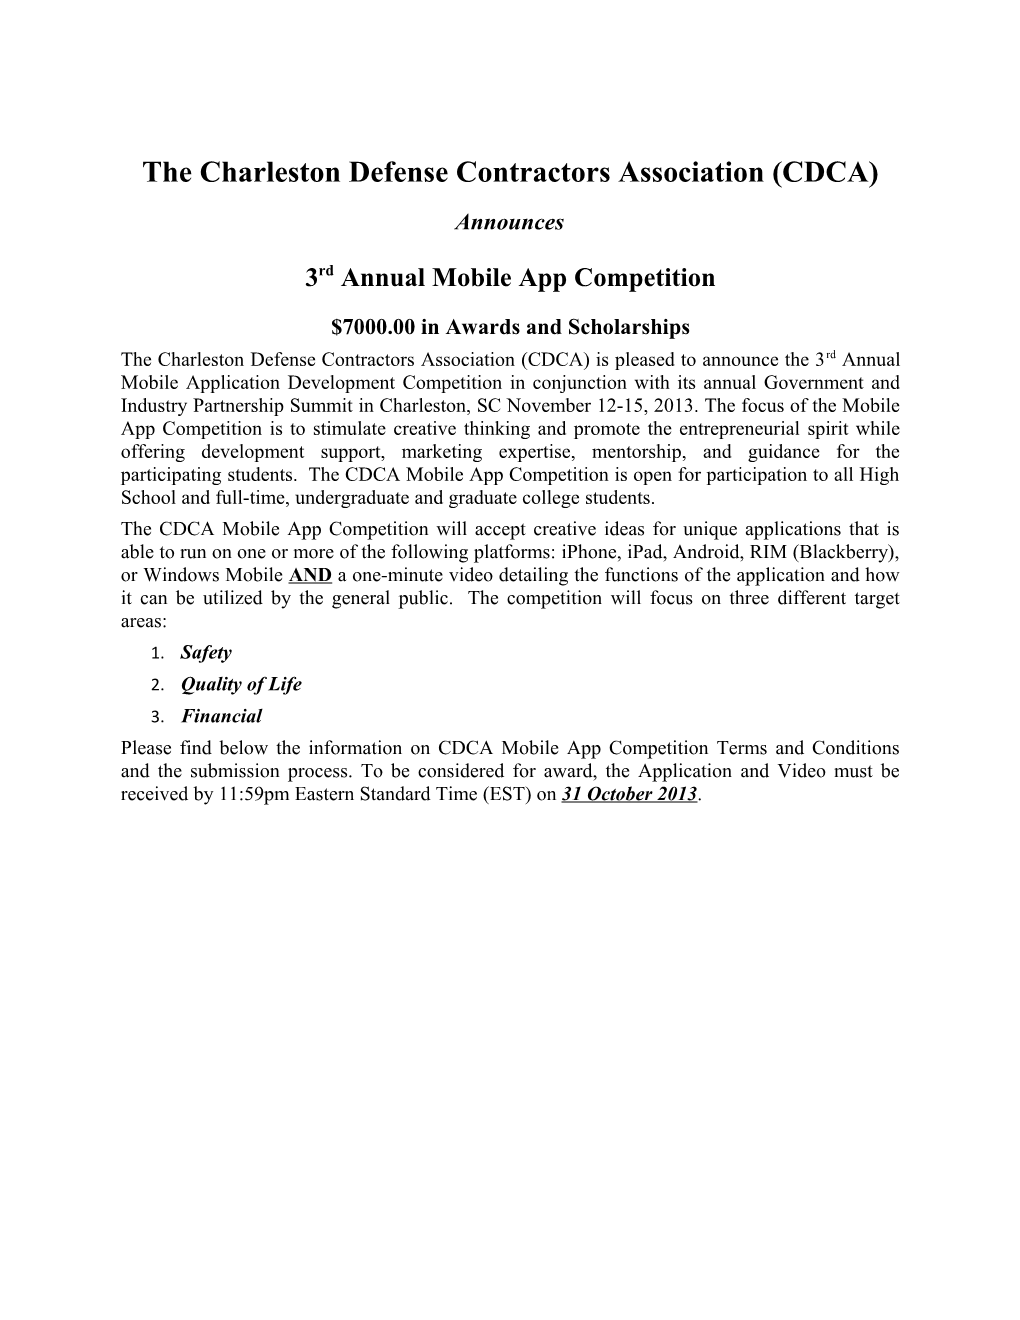 CDCA Mobile App Competition Information